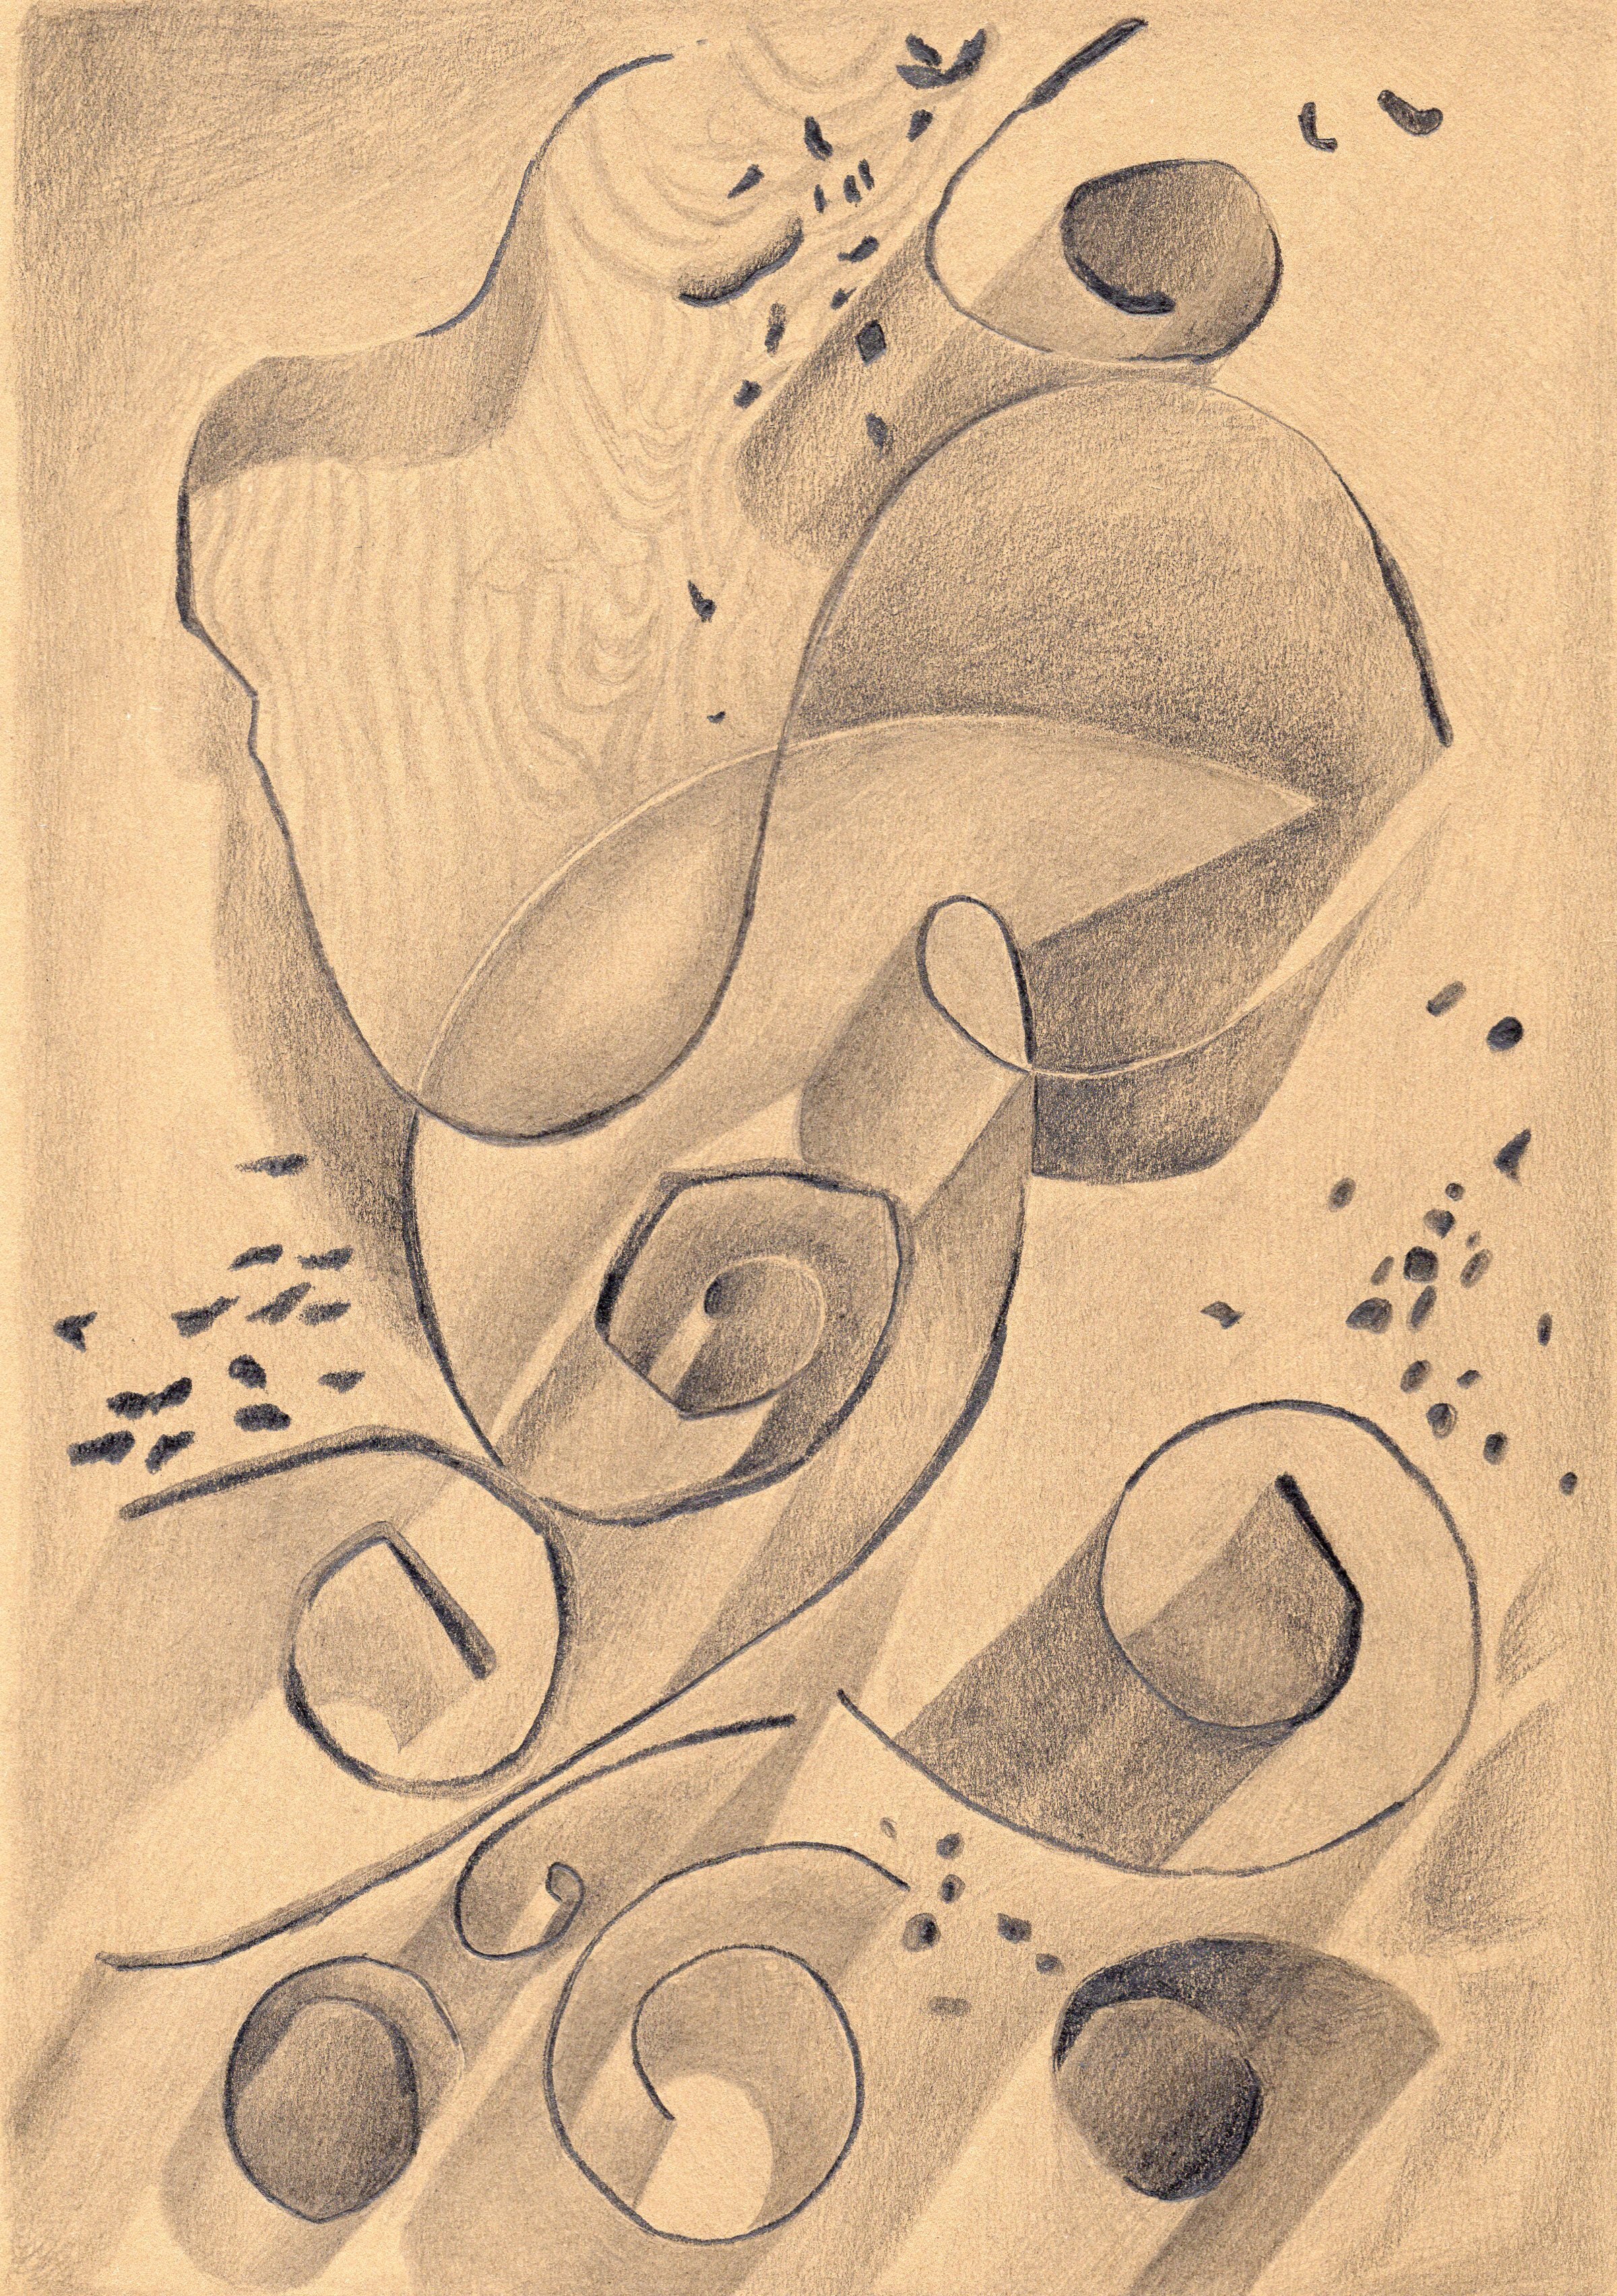    untitled (the curled word)   graphite on toned paper 11 3/4” x 8 1/4” 